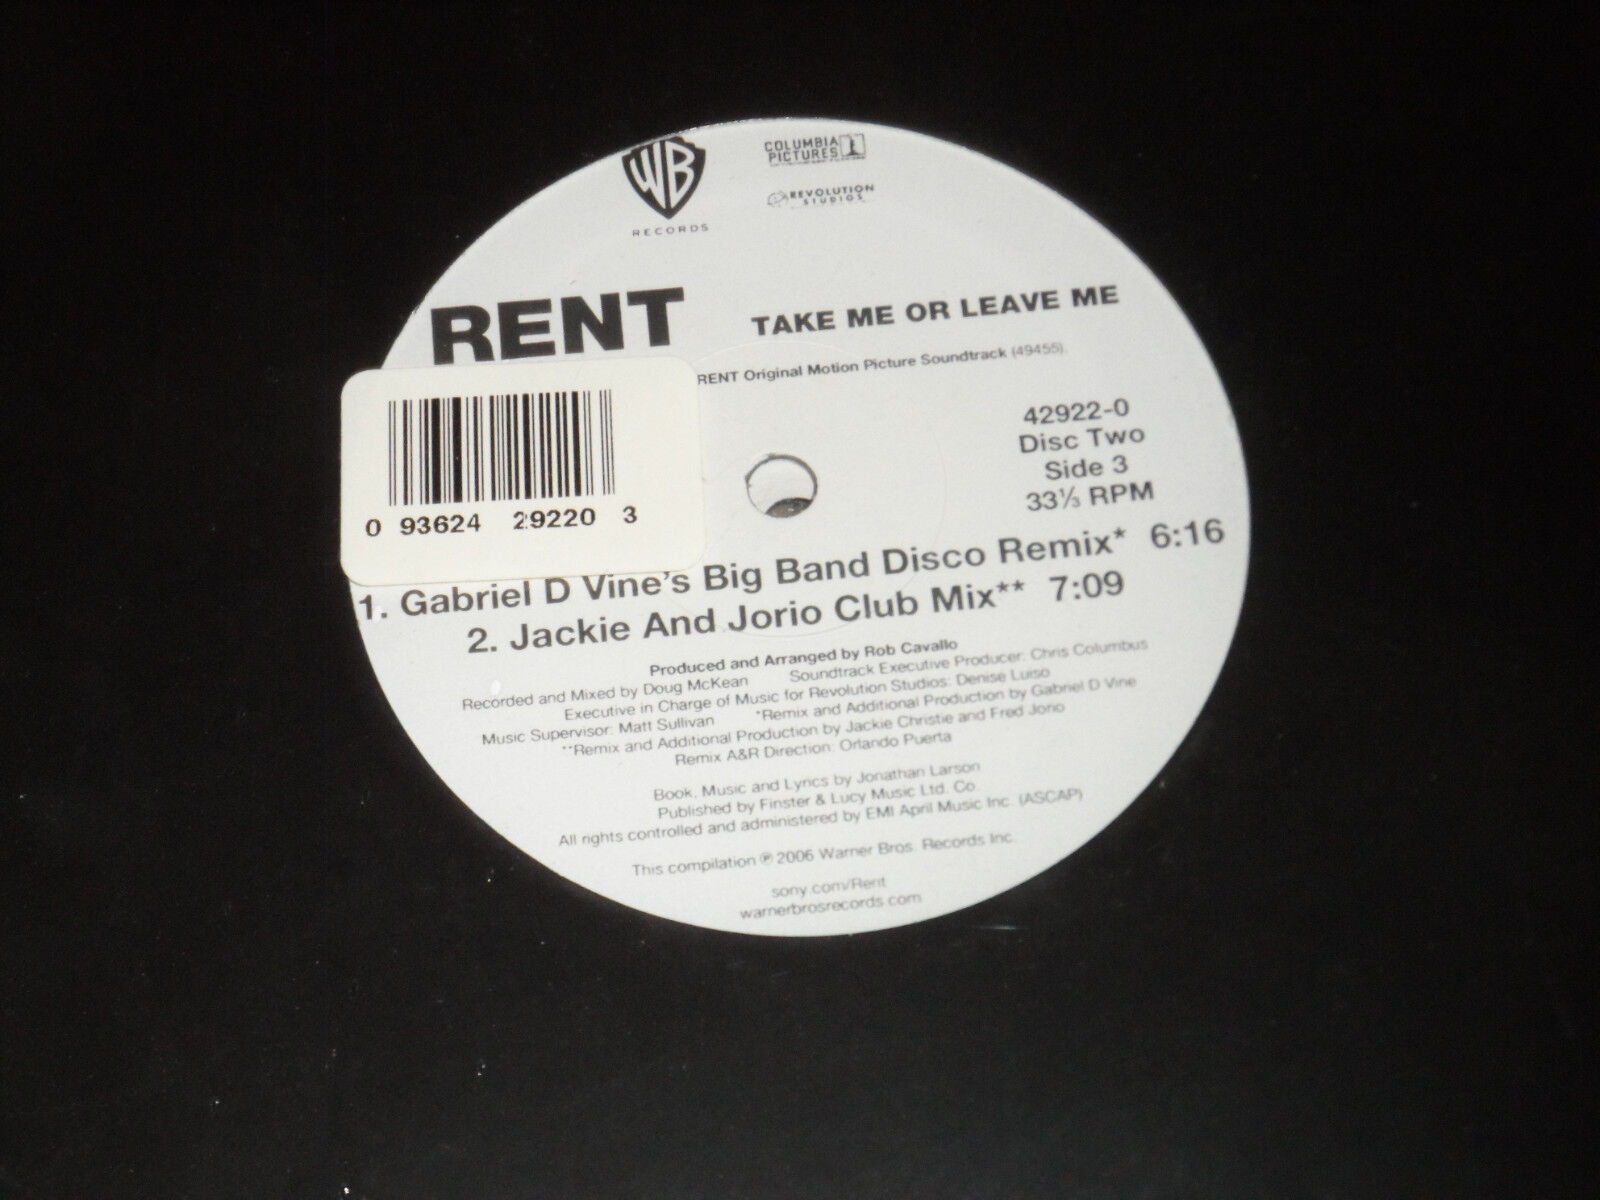 Rent - Take Me or Leave Me 12" Single BRAND NEW with REMIXES Dance